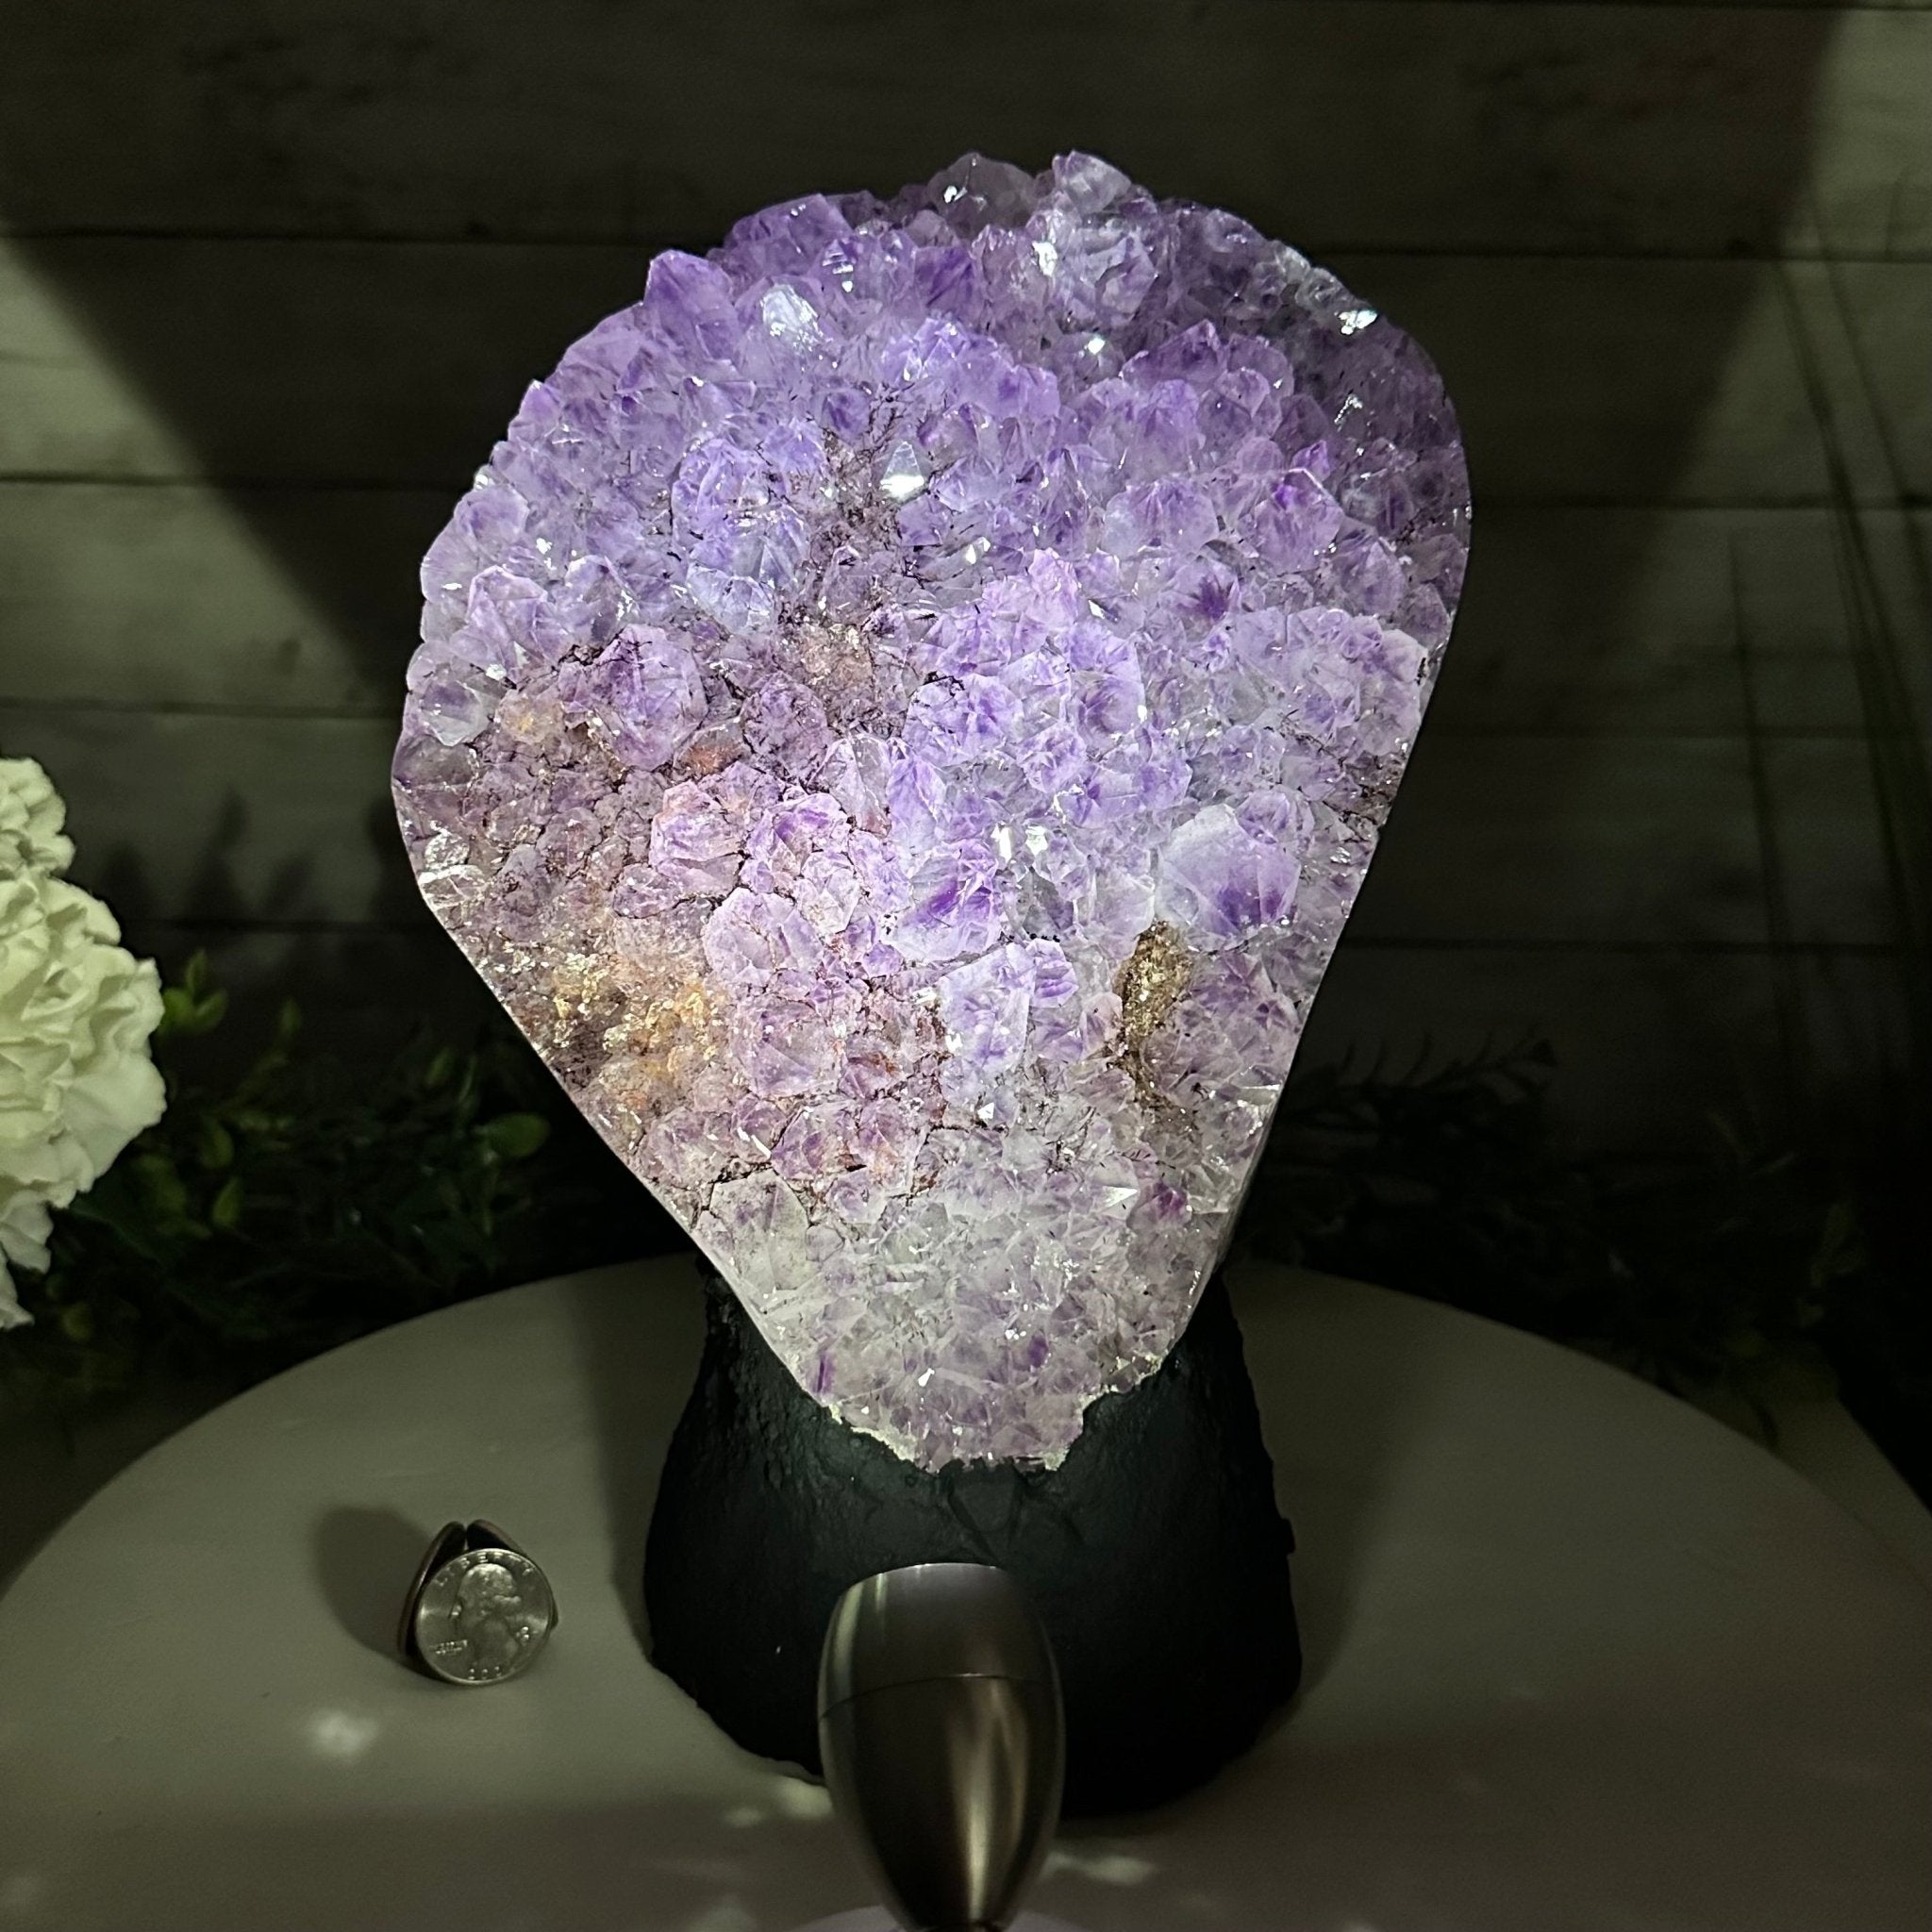 Extra Quality Amethyst Cluster on Cement Base, 12.3 lbs and 10" Tall #5614-0101 - Brazil GemsBrazil GemsExtra Quality Amethyst Cluster on Cement Base, 12.3 lbs and 10" Tall #5614-0101Clusters on Cement Bases5614-0101